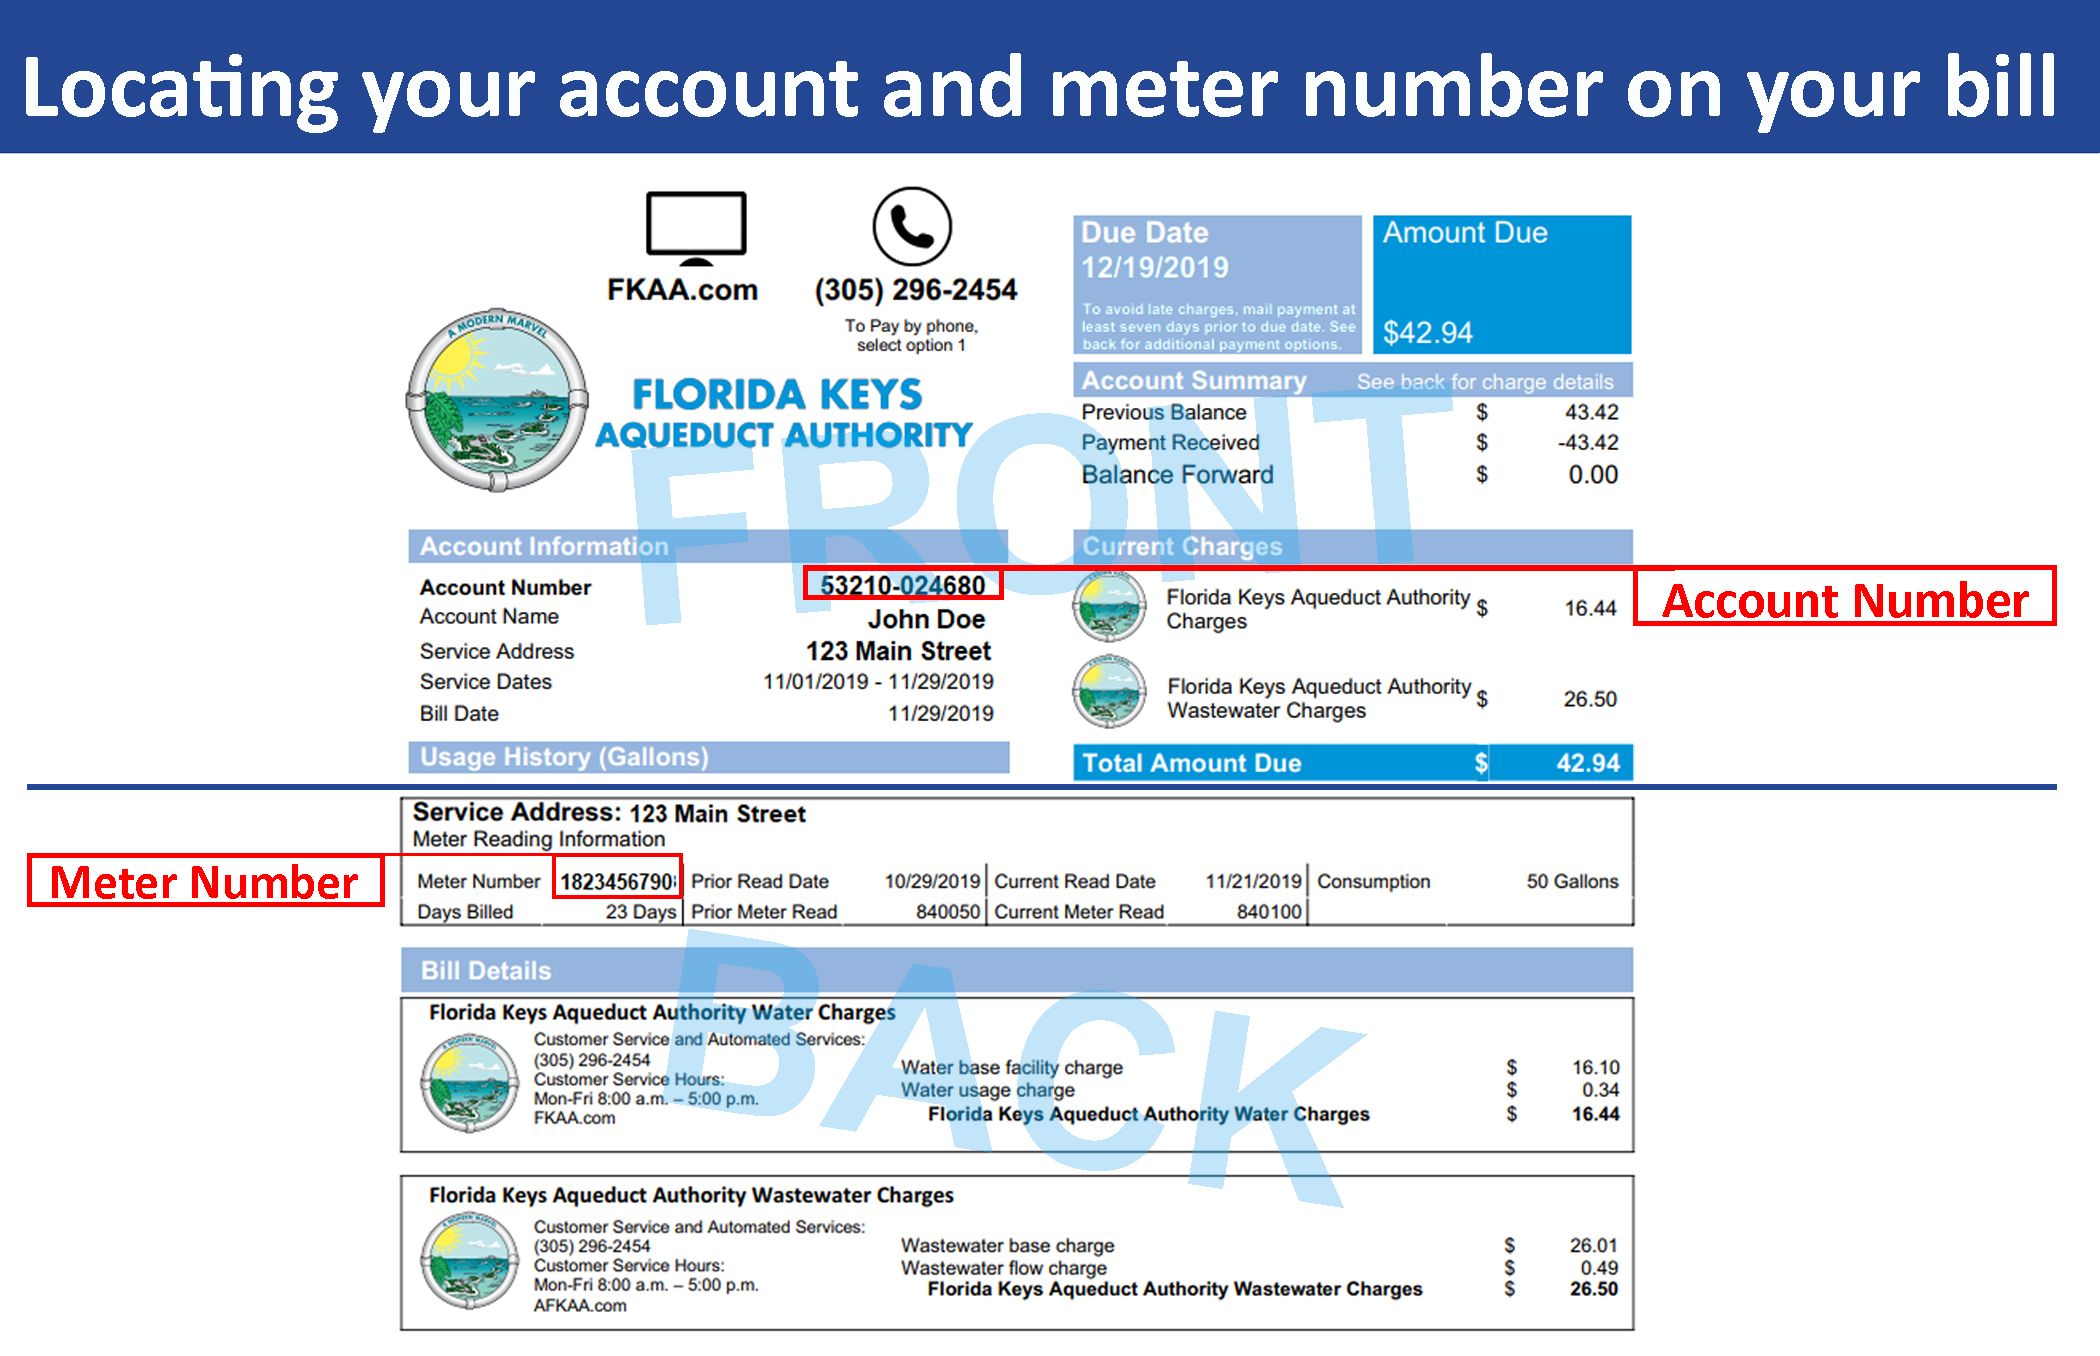 sample bill with account and meter numbers circled